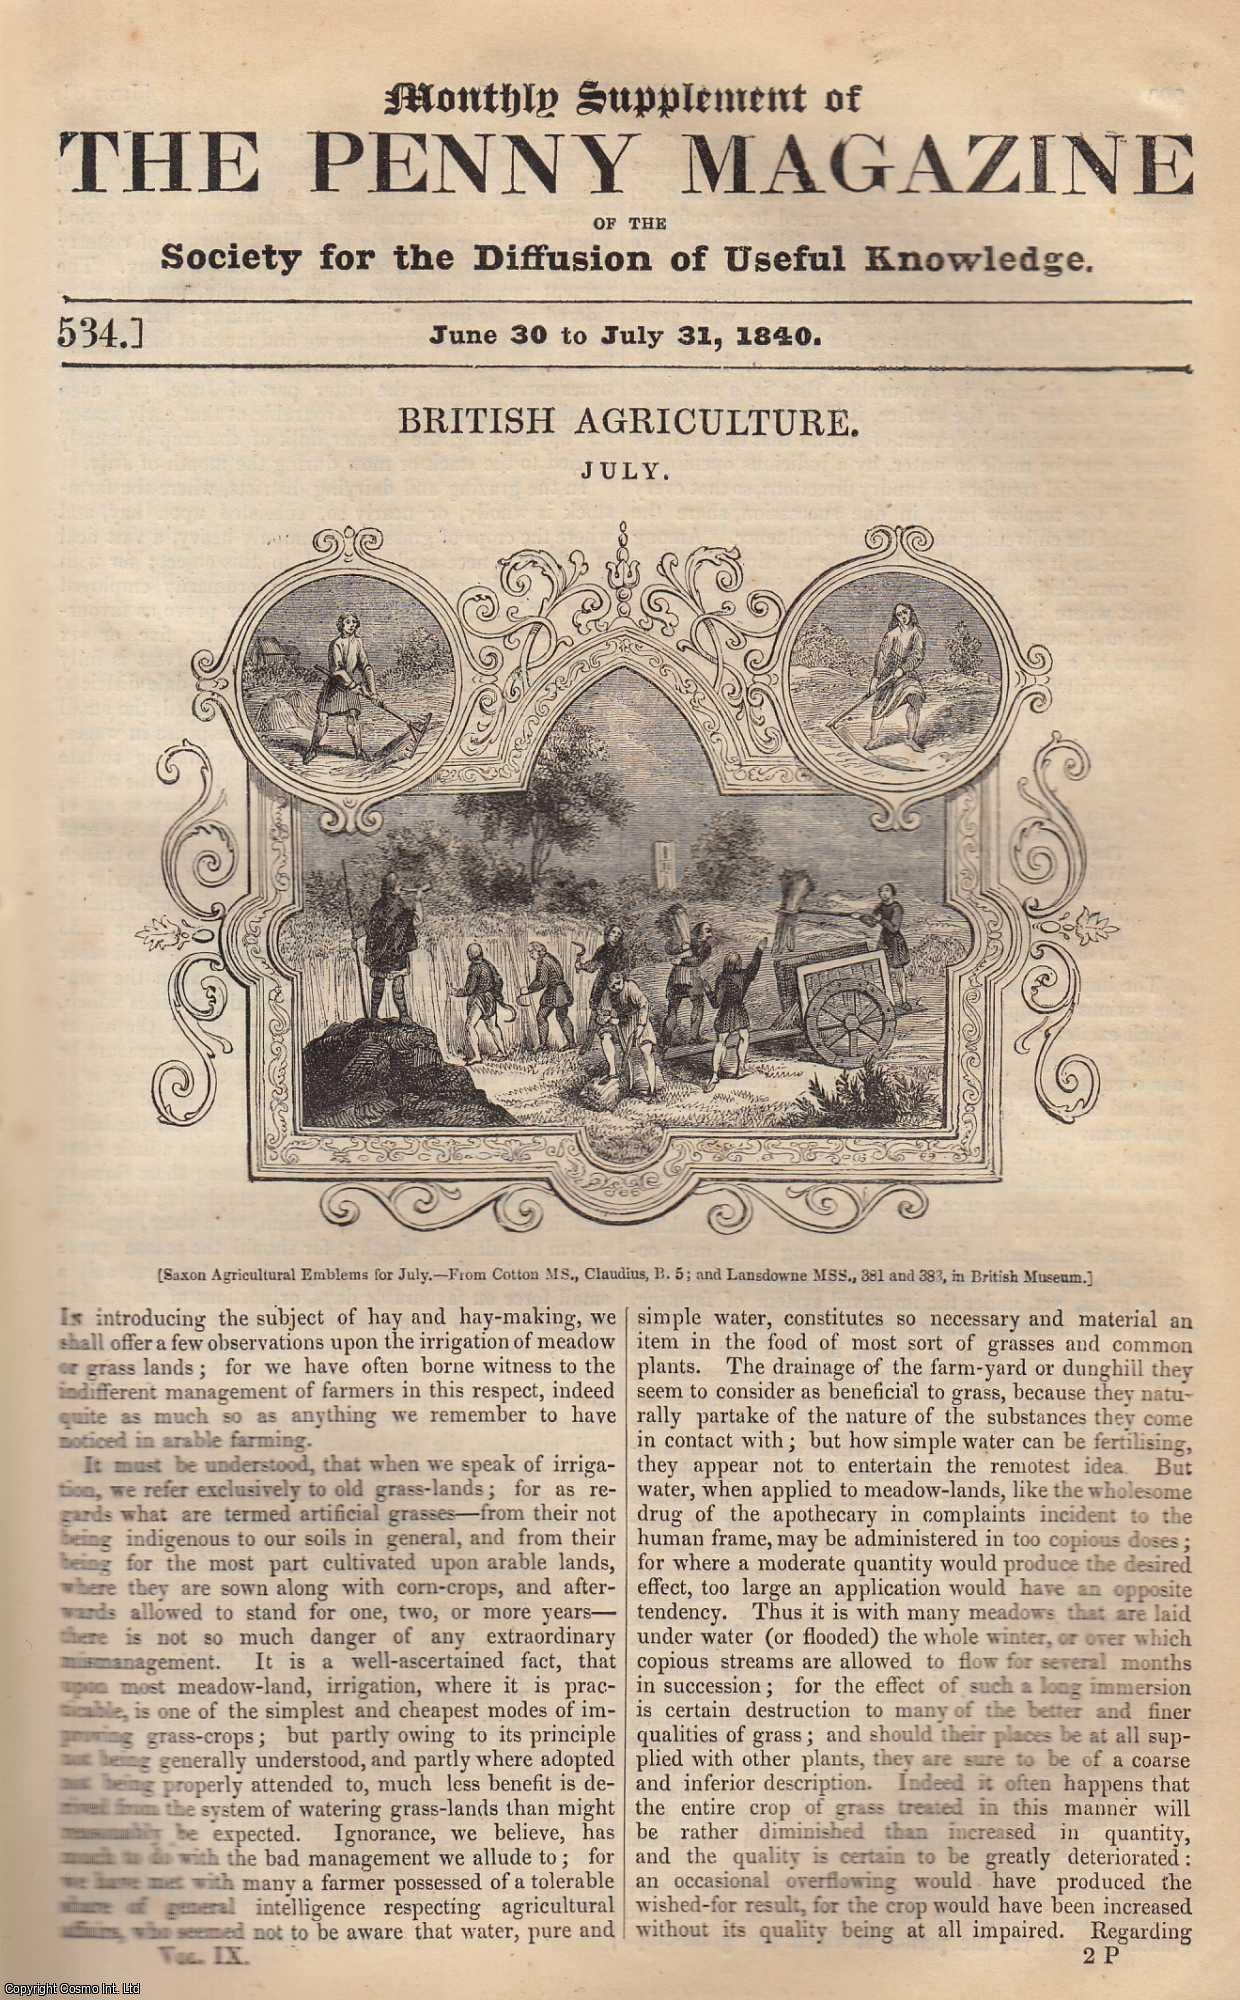 --- - British Agriculture (July). Issue No. 534, June 30th, 1840. A complete rare weekly issue of the Penny Magazine, 1840.